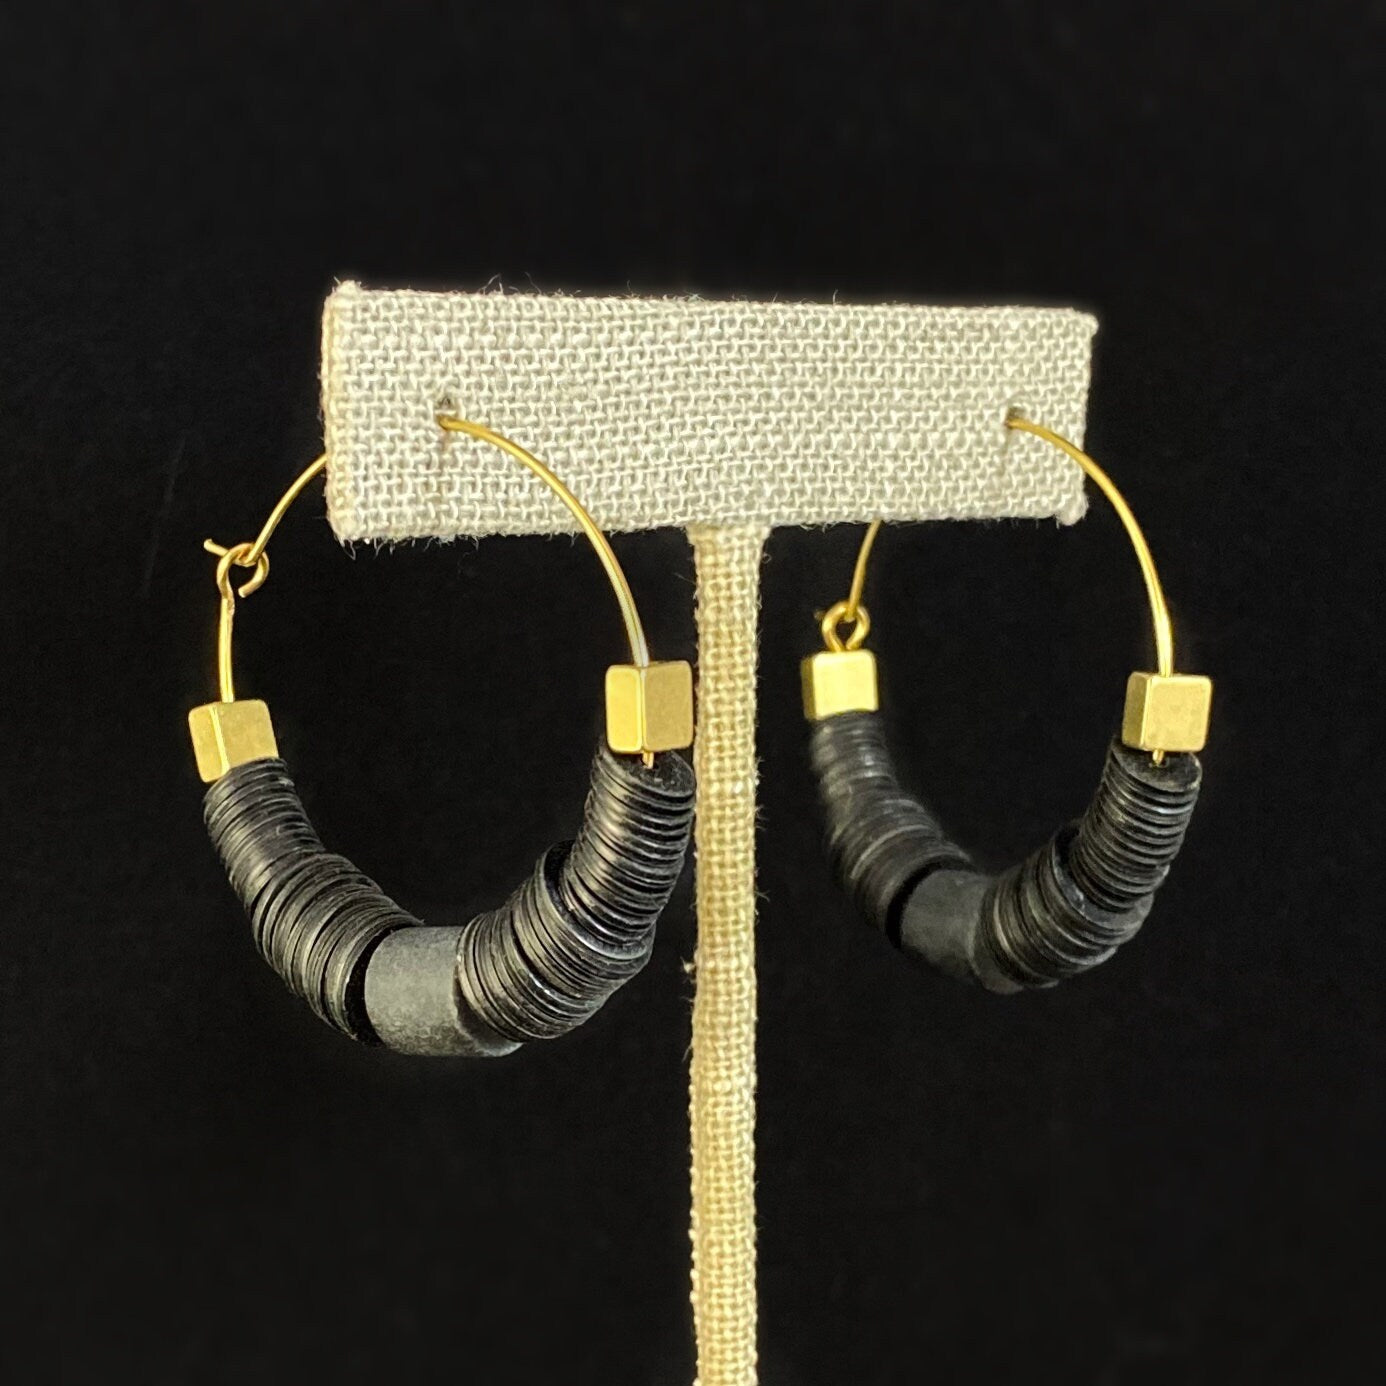 Black Beaded Hoop Earrings - 18kt Gold Over Brass with Vulcanite and Black Agate, David Aubrey Jewelry